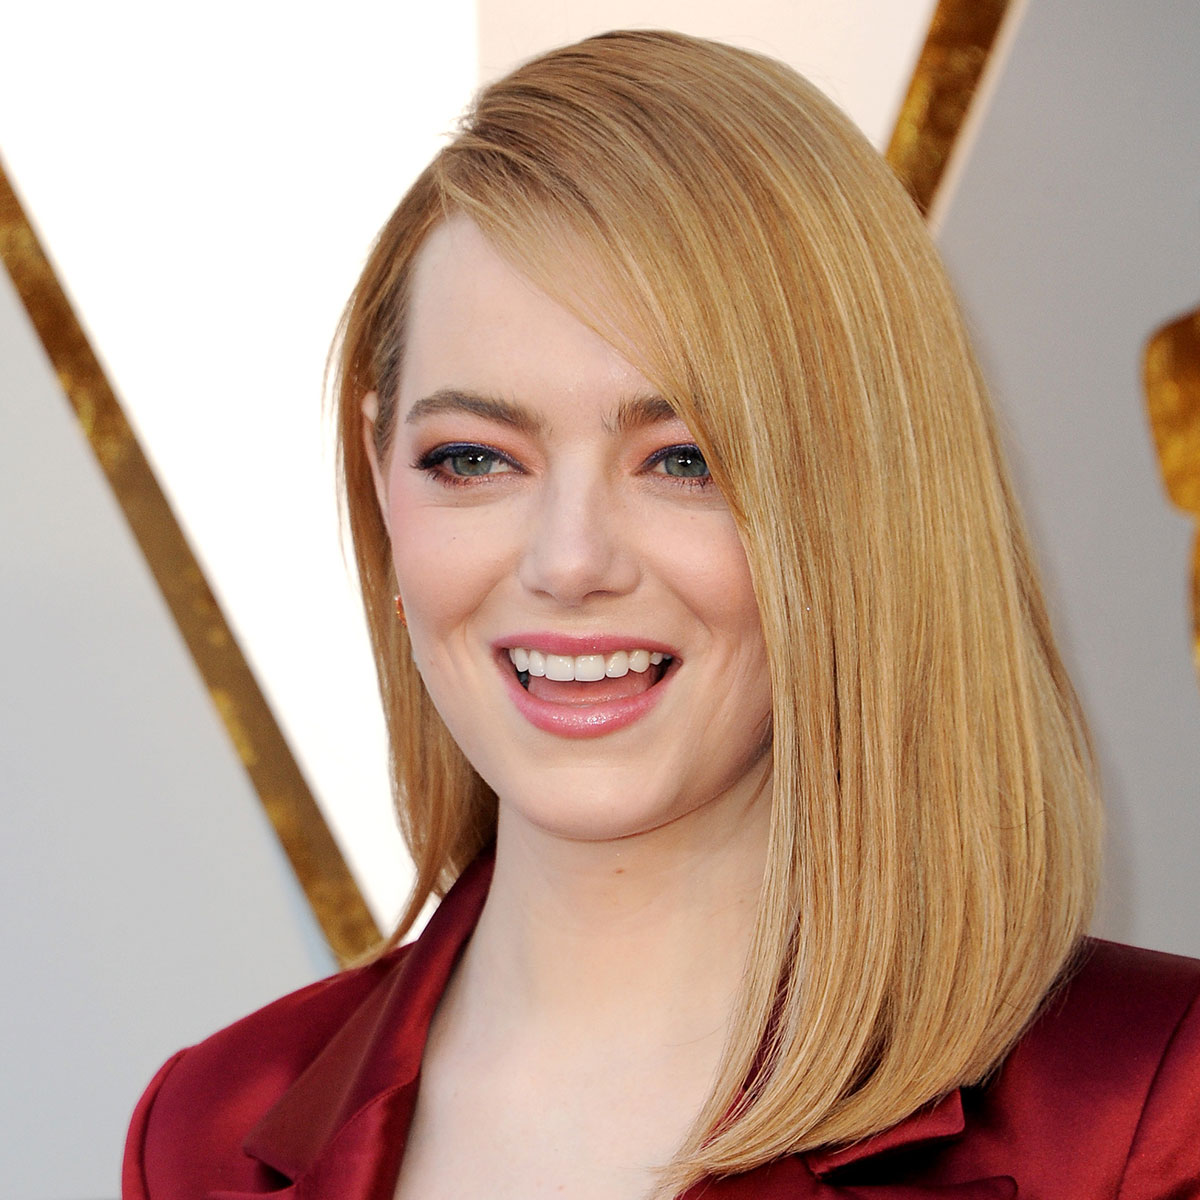 Emma Stone Shows Off Her Tiny Waist In Cinched, Elegant White Louis Vuitton  Gown In Rare Red Carpet Appearance - SHEfinds